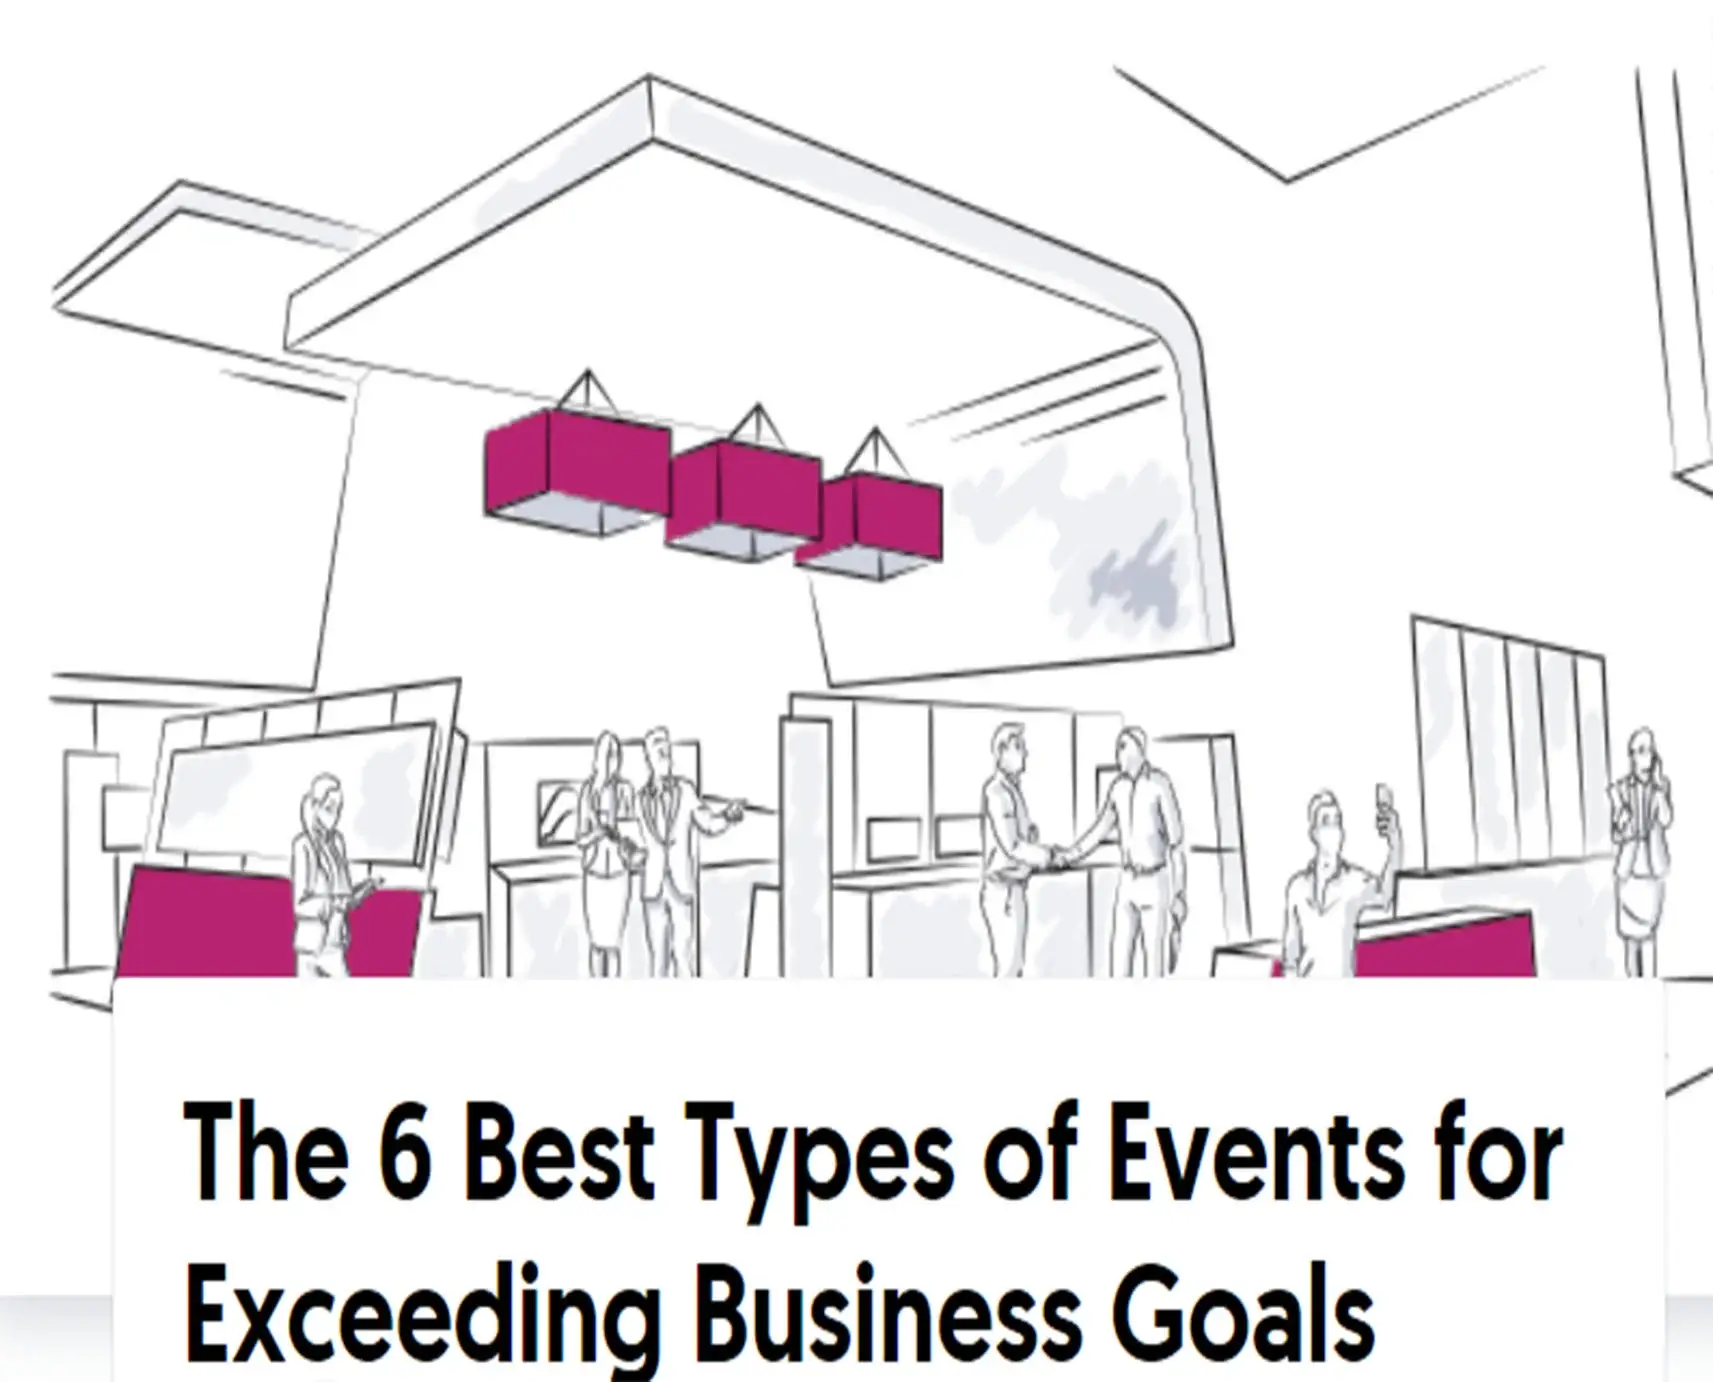 The 6 Best Types of Events for Exceeding Business Goals